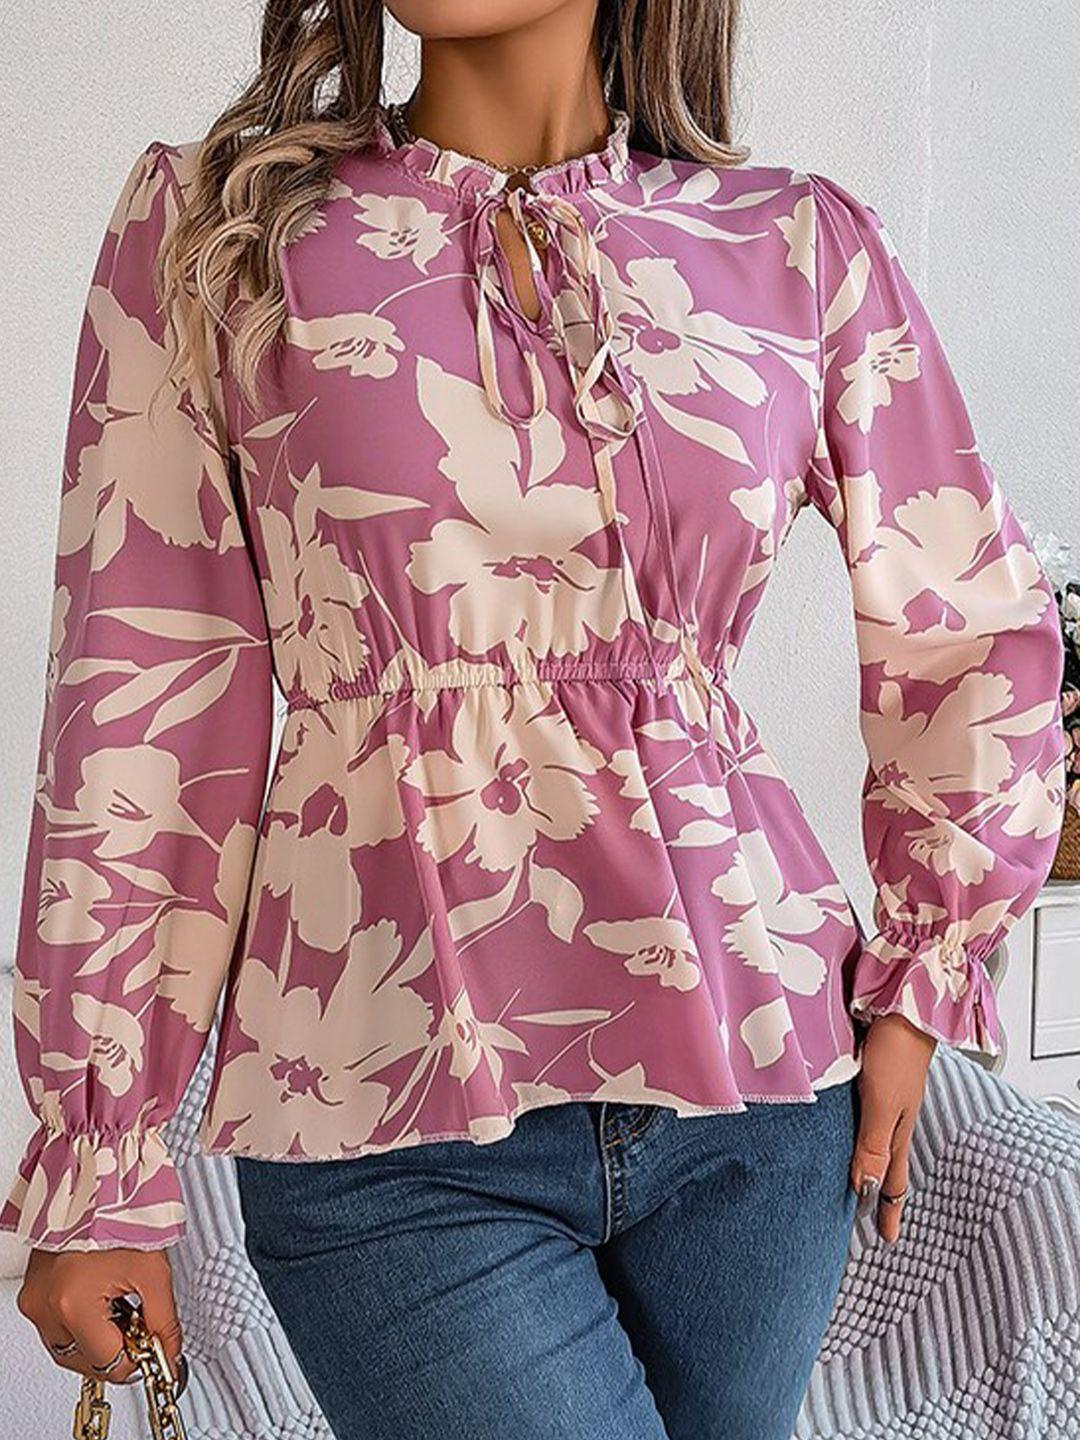 stylecast floral print tie-up neck top